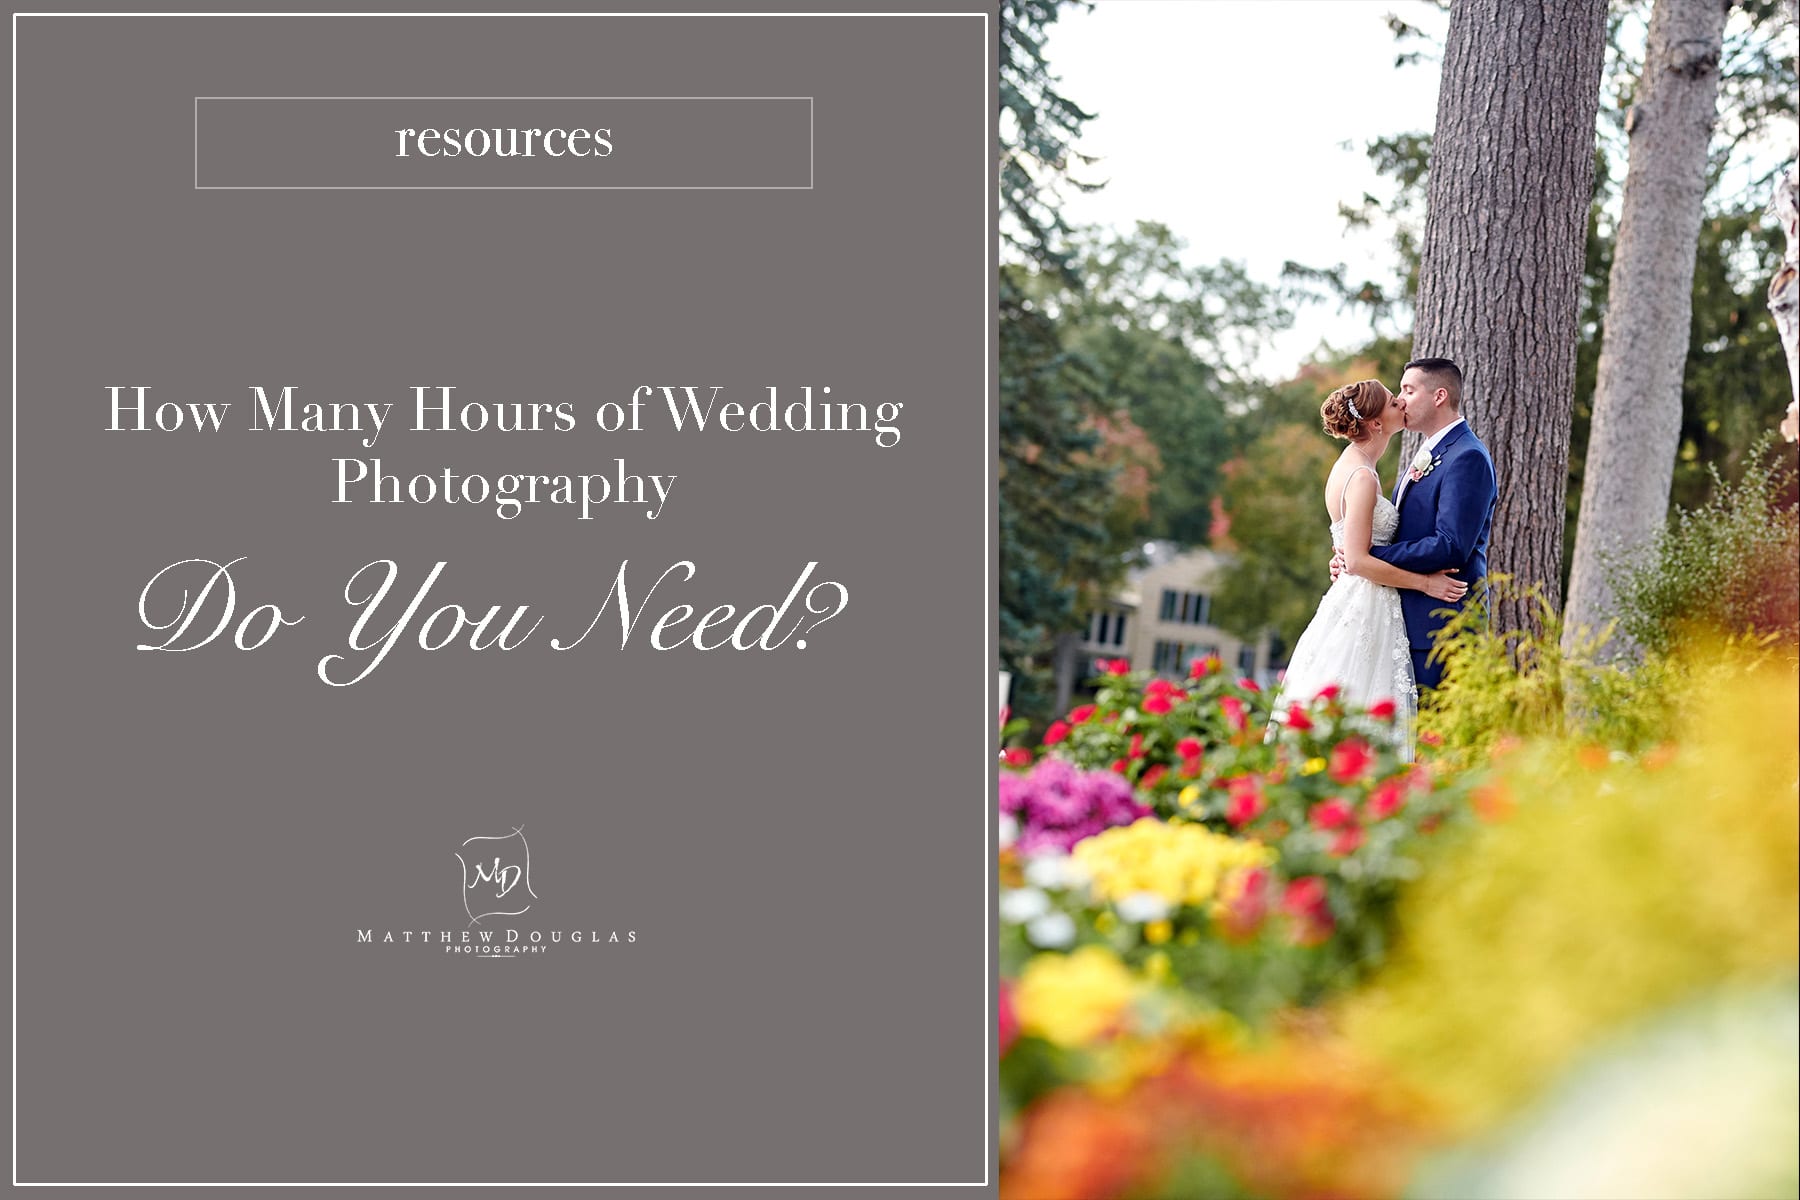 How Many Hours of Wedding Photography Do You Need?